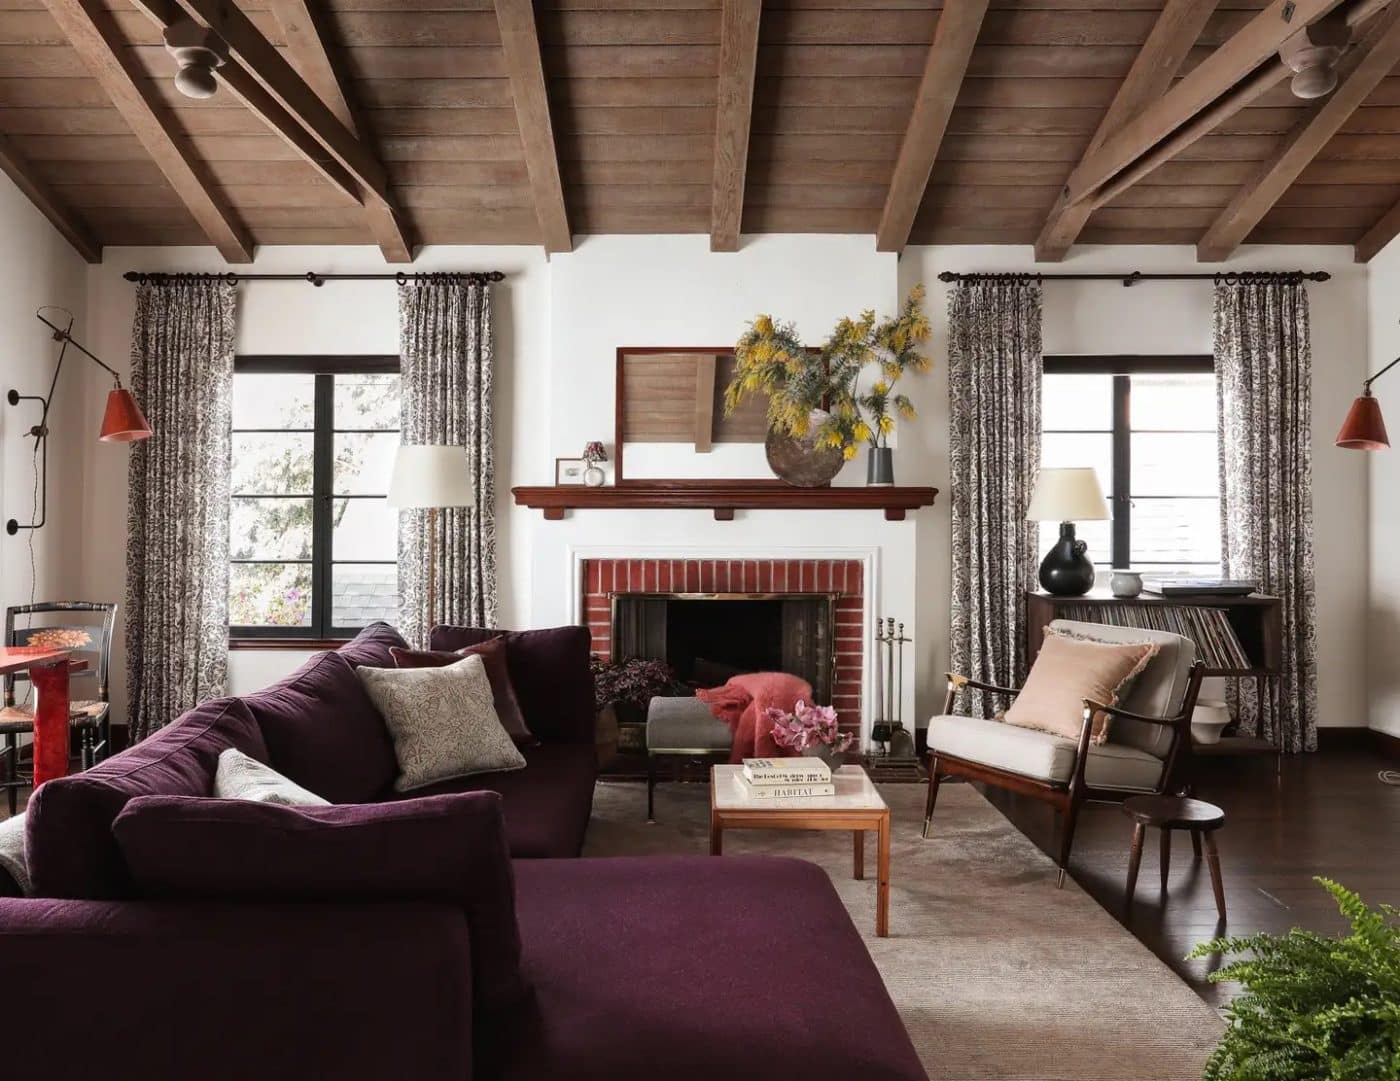 A living room with a wood-beam ceiling, off-white walls, a brick fireplace, a deep plum sofa and a wooden armchair and stool